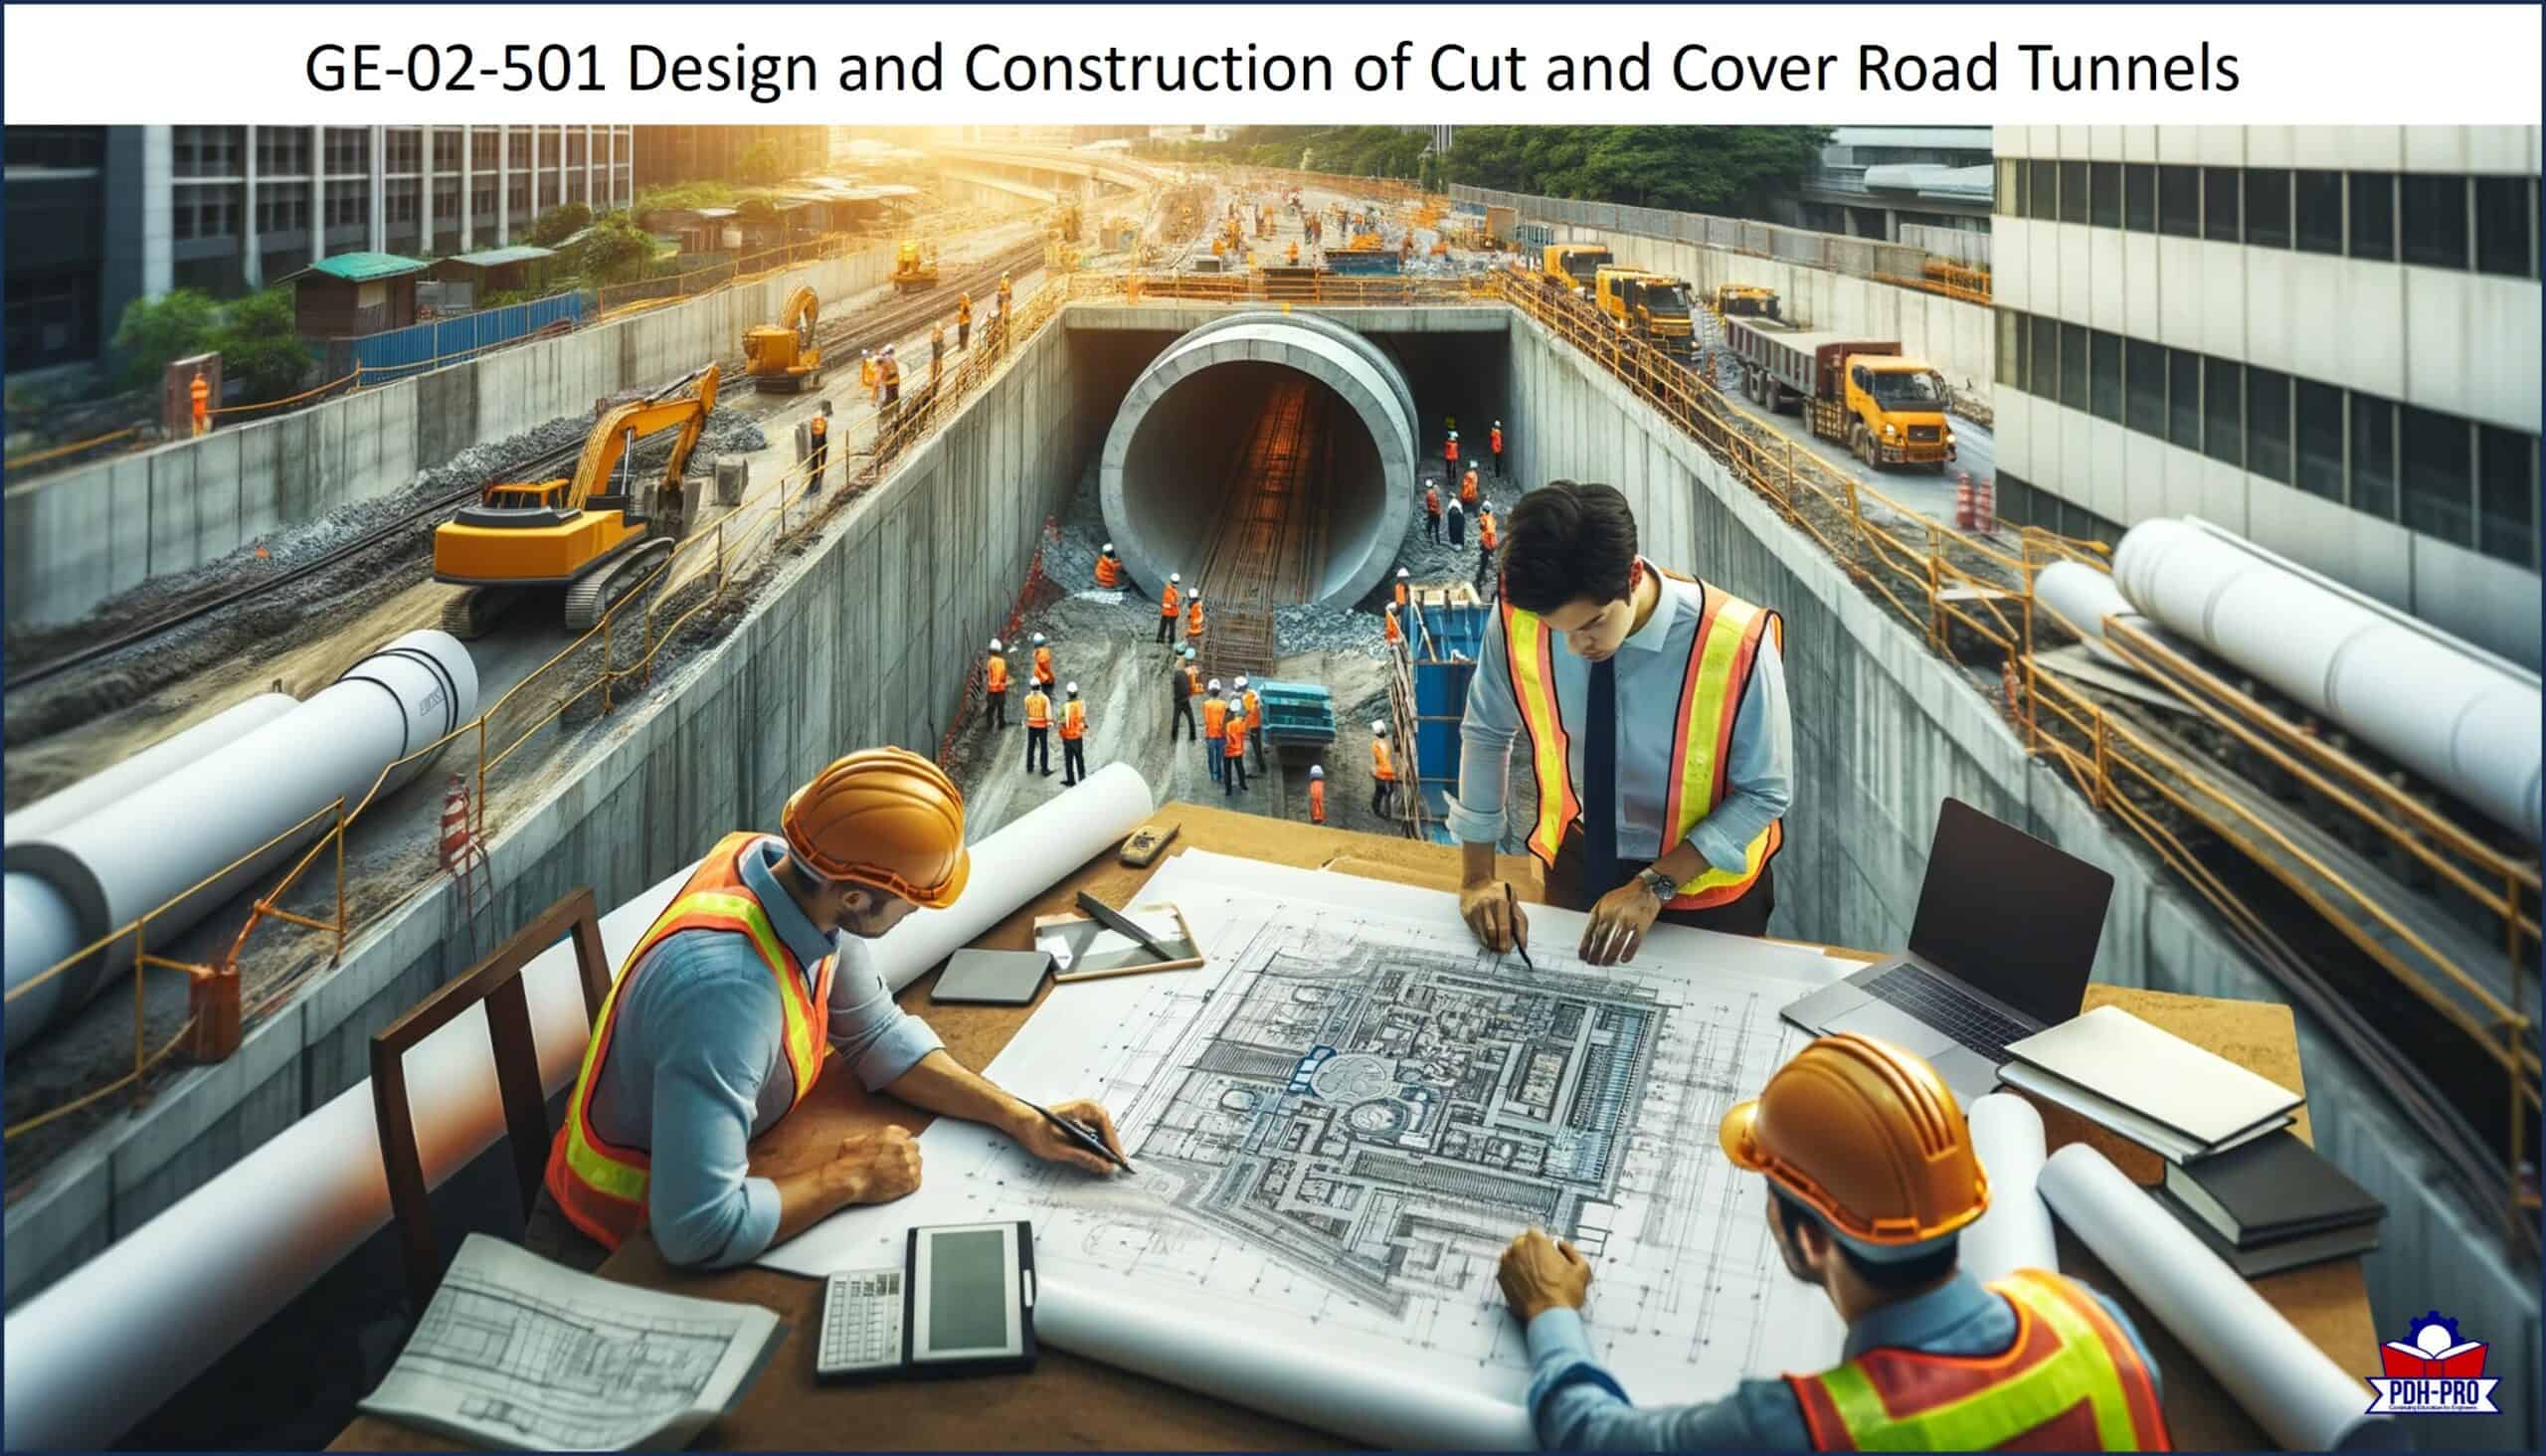 Design and Construction of Cut and Cover Road Tunnels